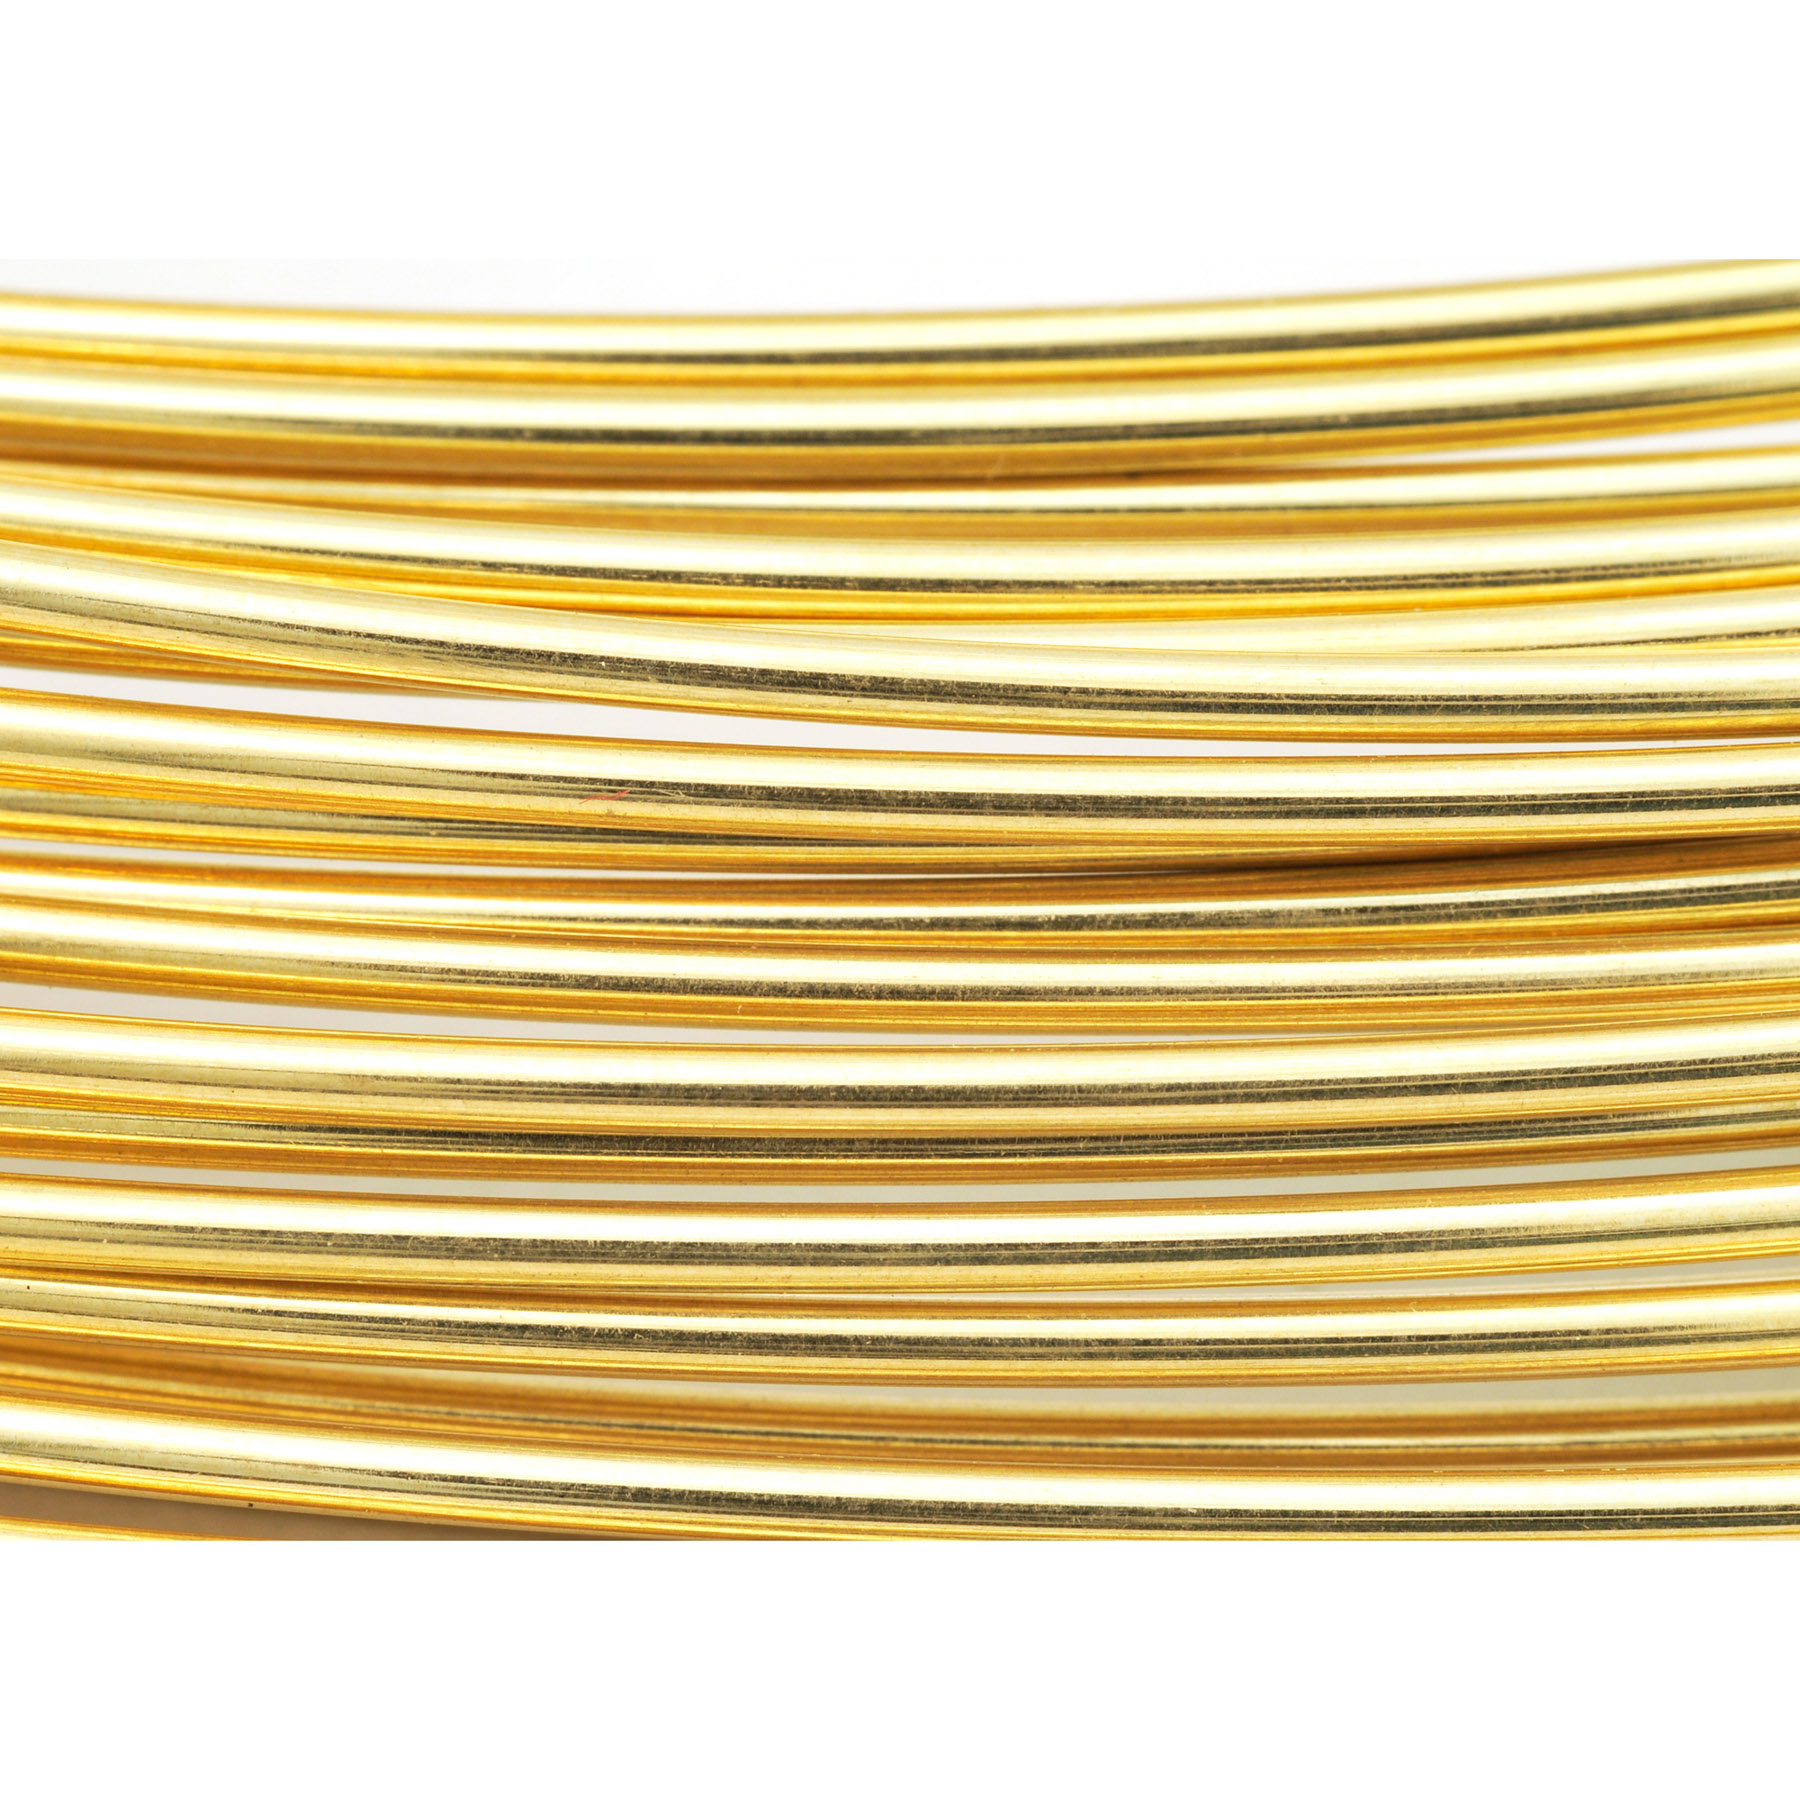 uGems 14K Yellow Gold Solder Wire 22 Gauge Density Is Medium 14kt (Qty=3 Inches)